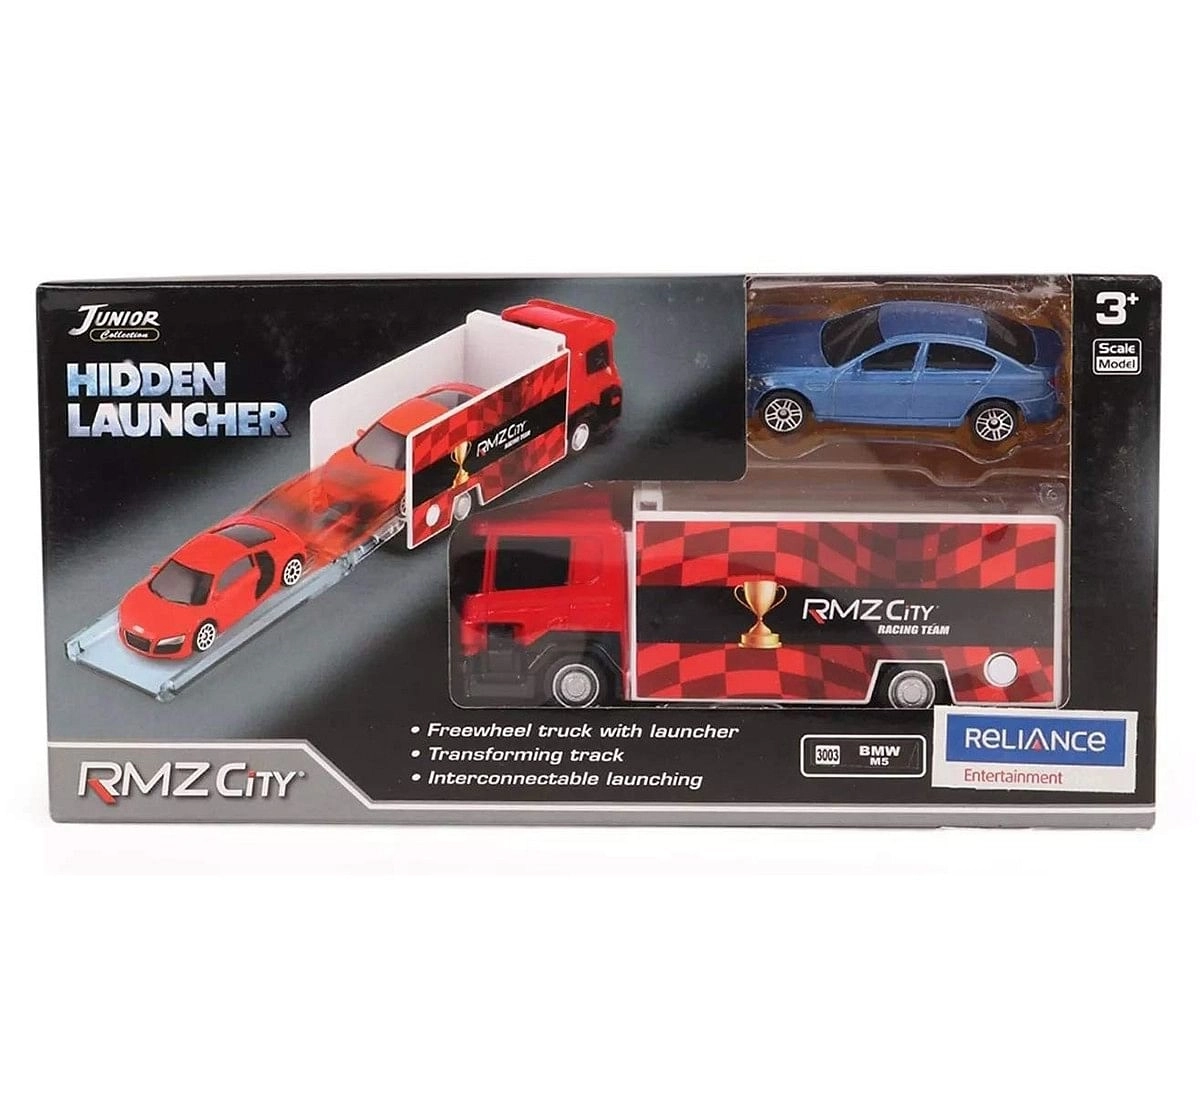  Rmz City 1:64 Scania Truck Launcher, Red With M5 Bmw, Blue Vehicles for Kids age 3Y+ (Blue)